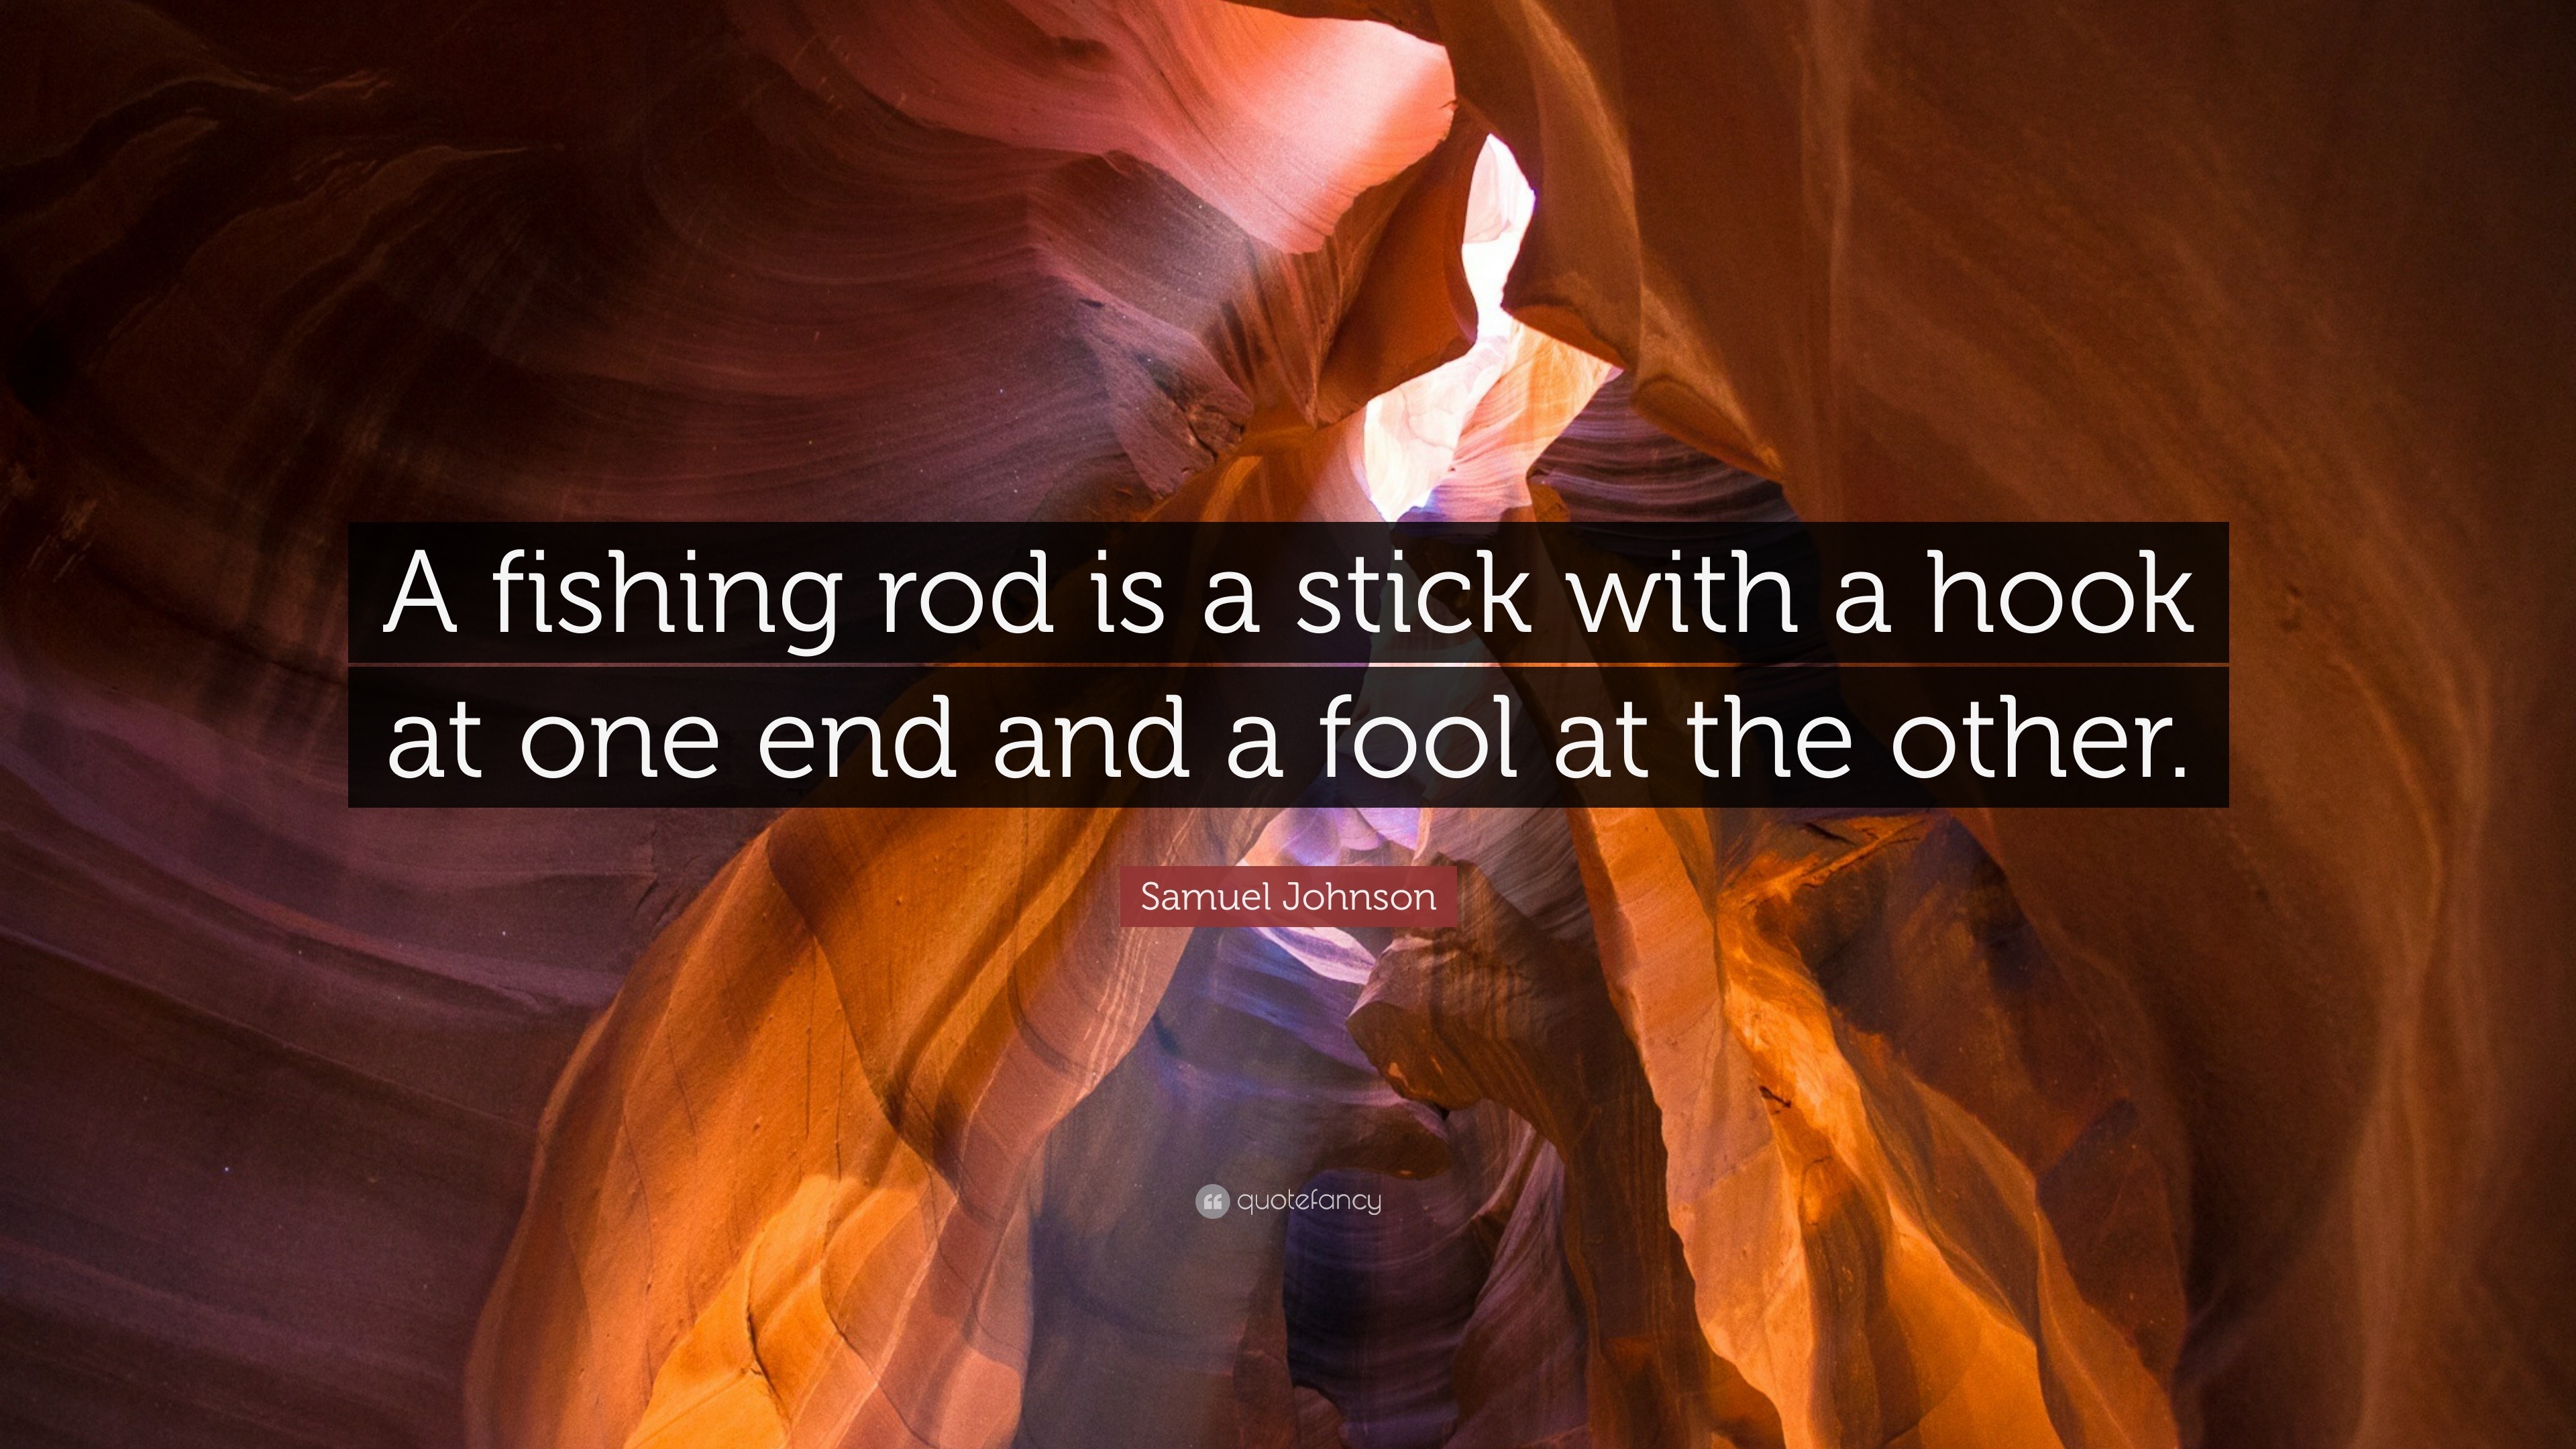 Samuel Johnson Quote: “A fishing rod is a stick with a hook at one